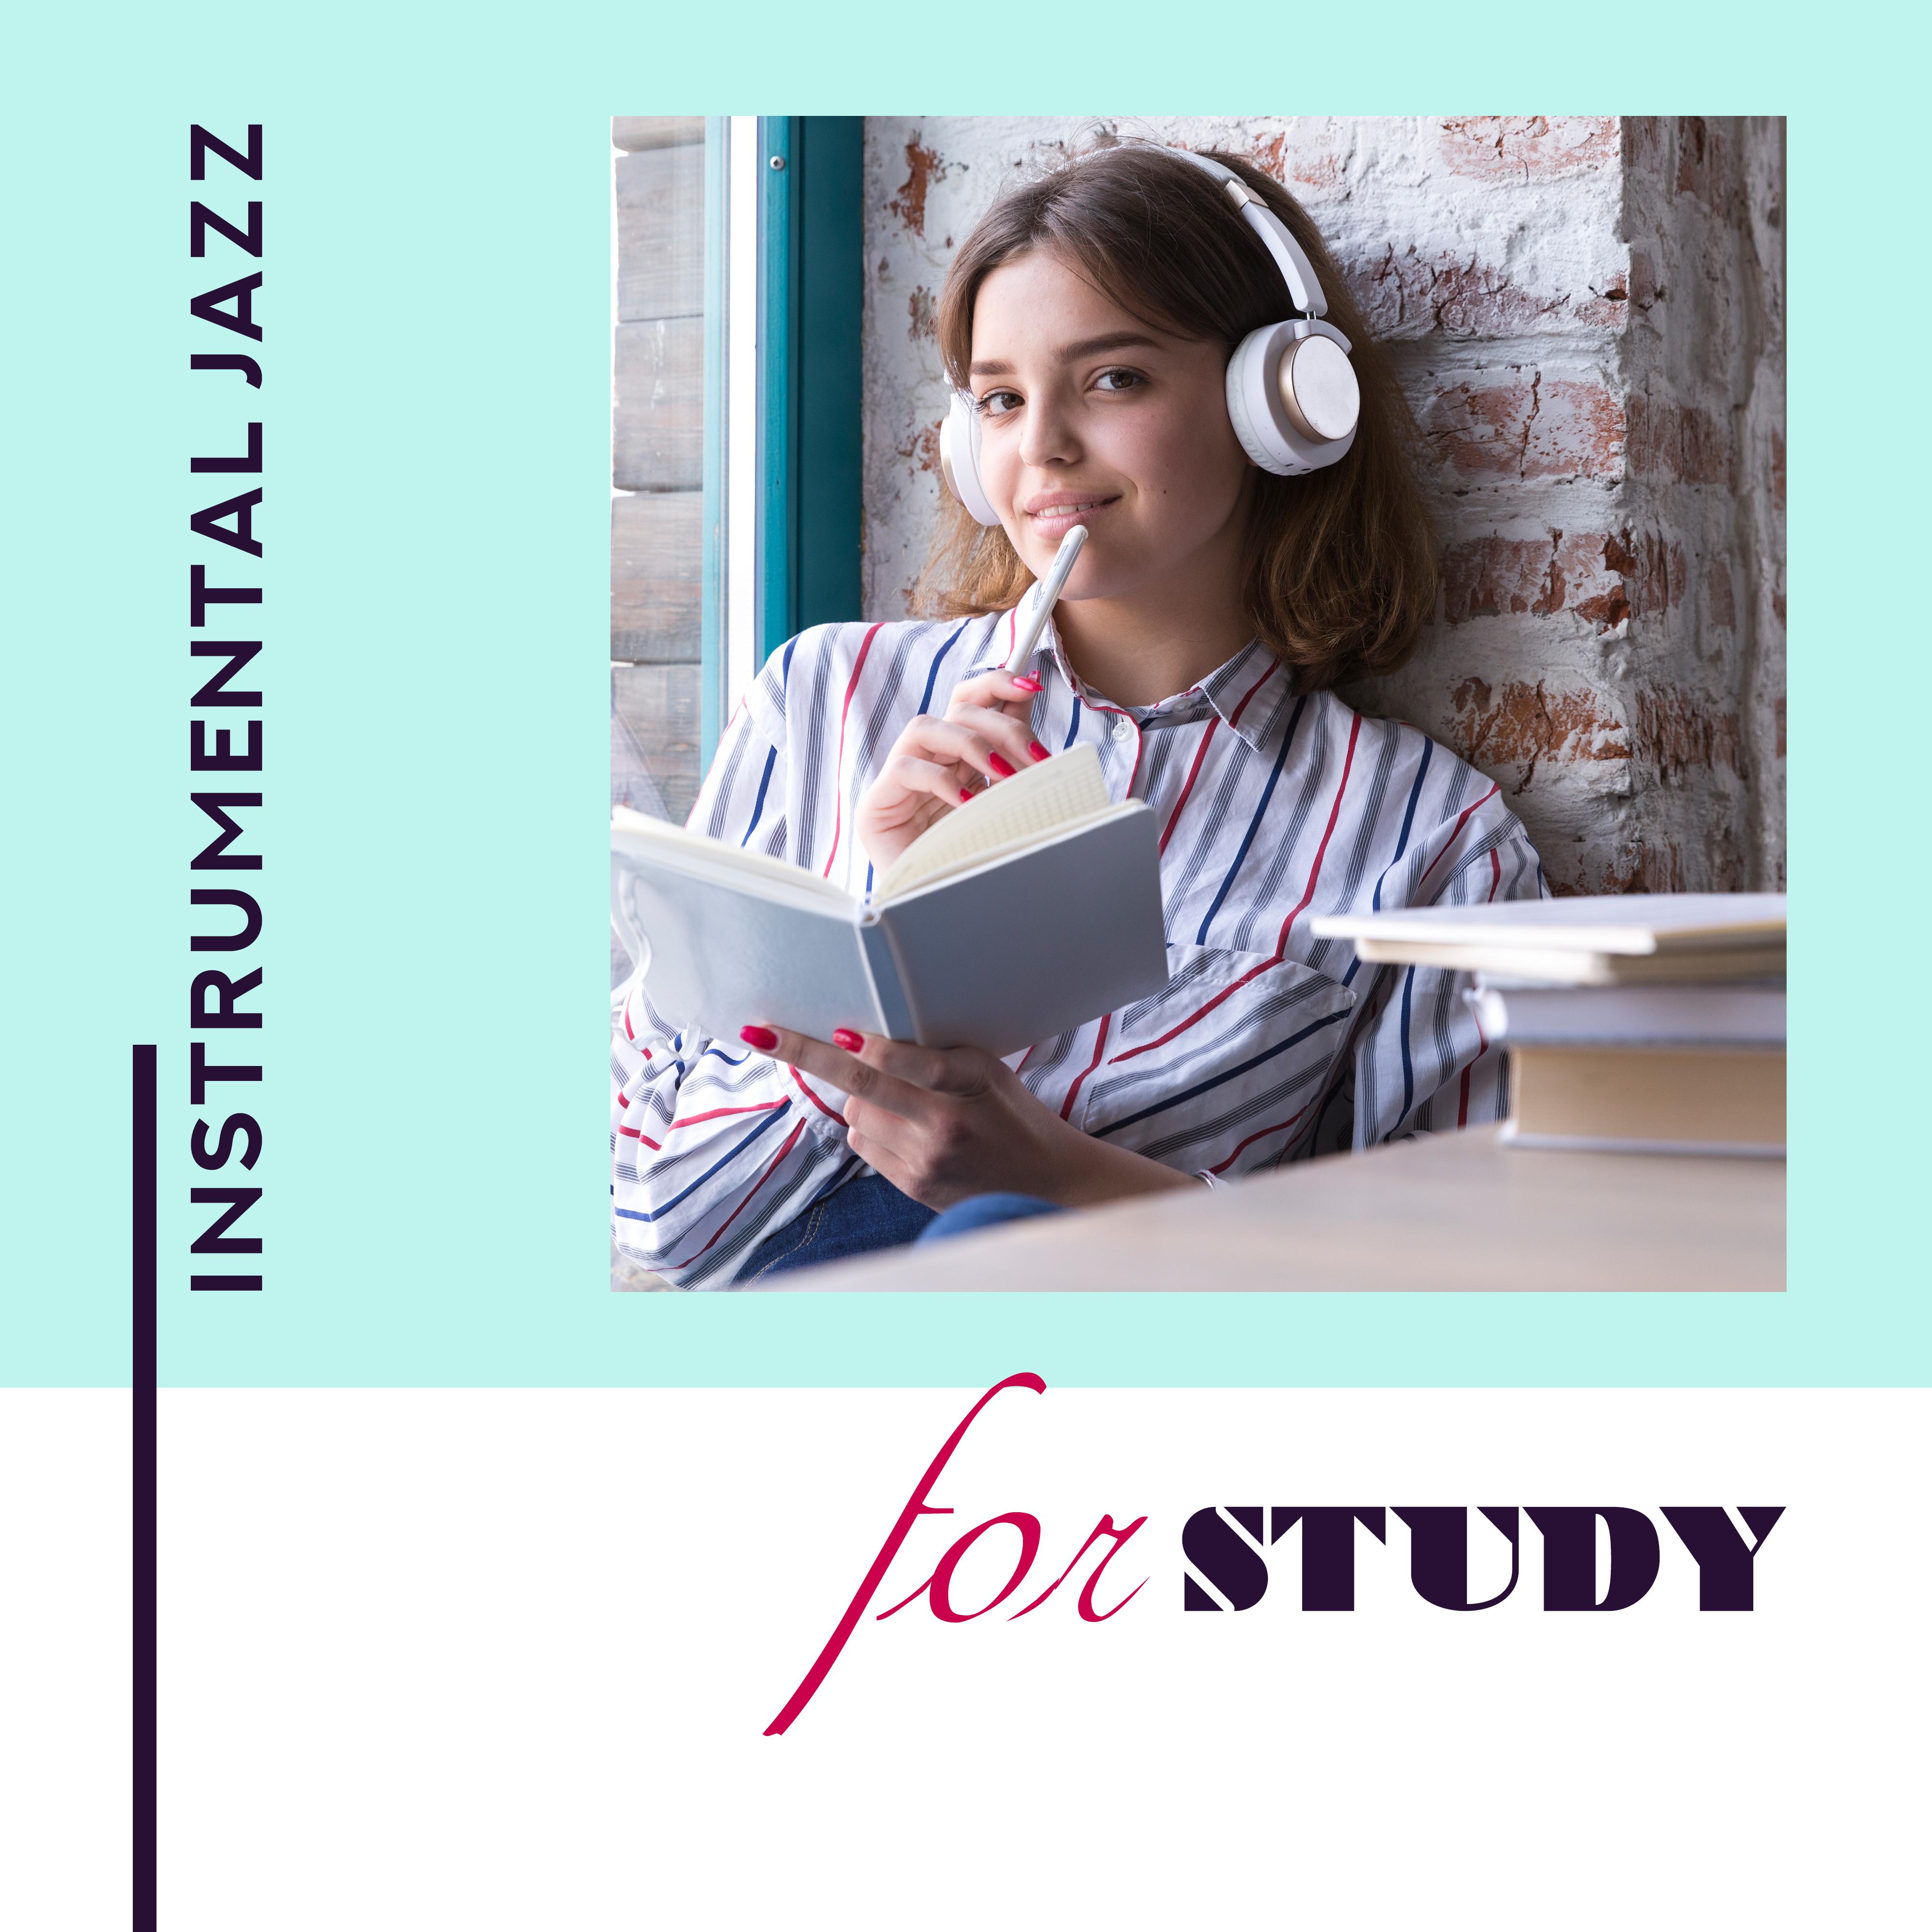 Instrumental Jazz for Study  Jazz Relaxation, Piano Music, Reduce Stress, Jazz for Deep Concentration, Reading Music, Calm Down